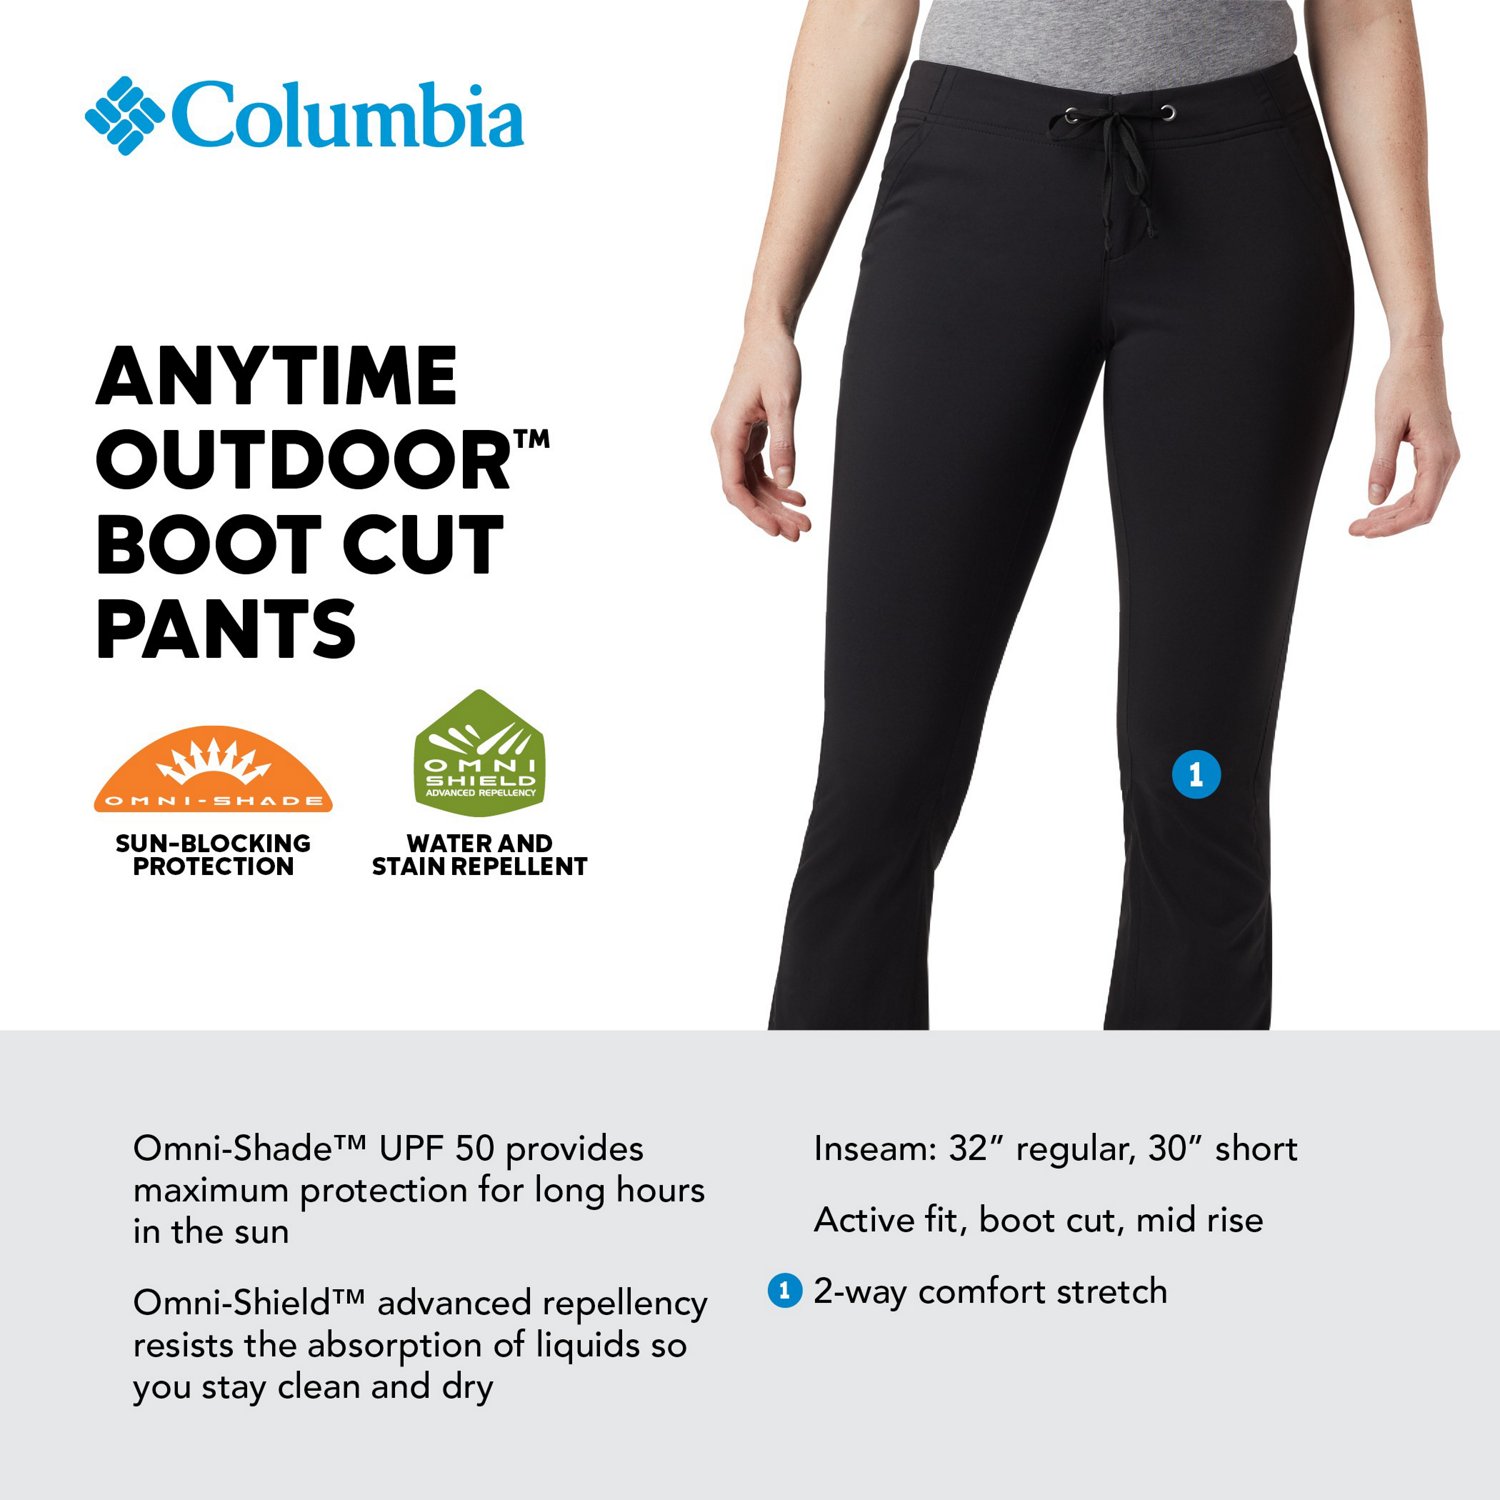 Columbia Anytime Outdoor Full Leg Pants for Ladies